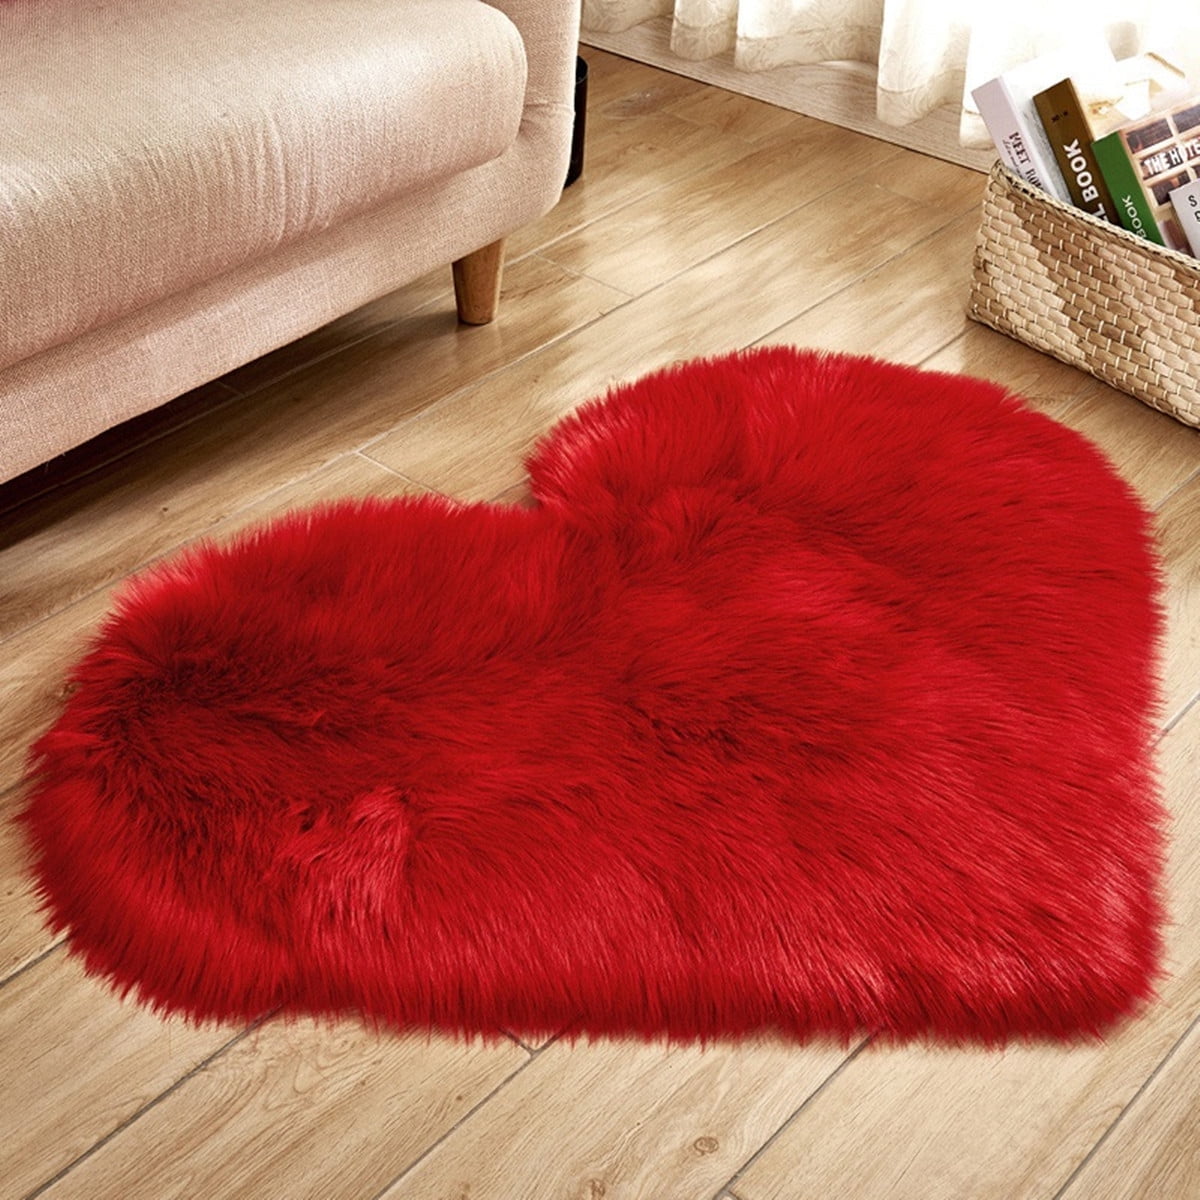 All You Need is LOVE Hearts Stripes Valentine Area Rugs Carpet Bedroom Floor Mat 